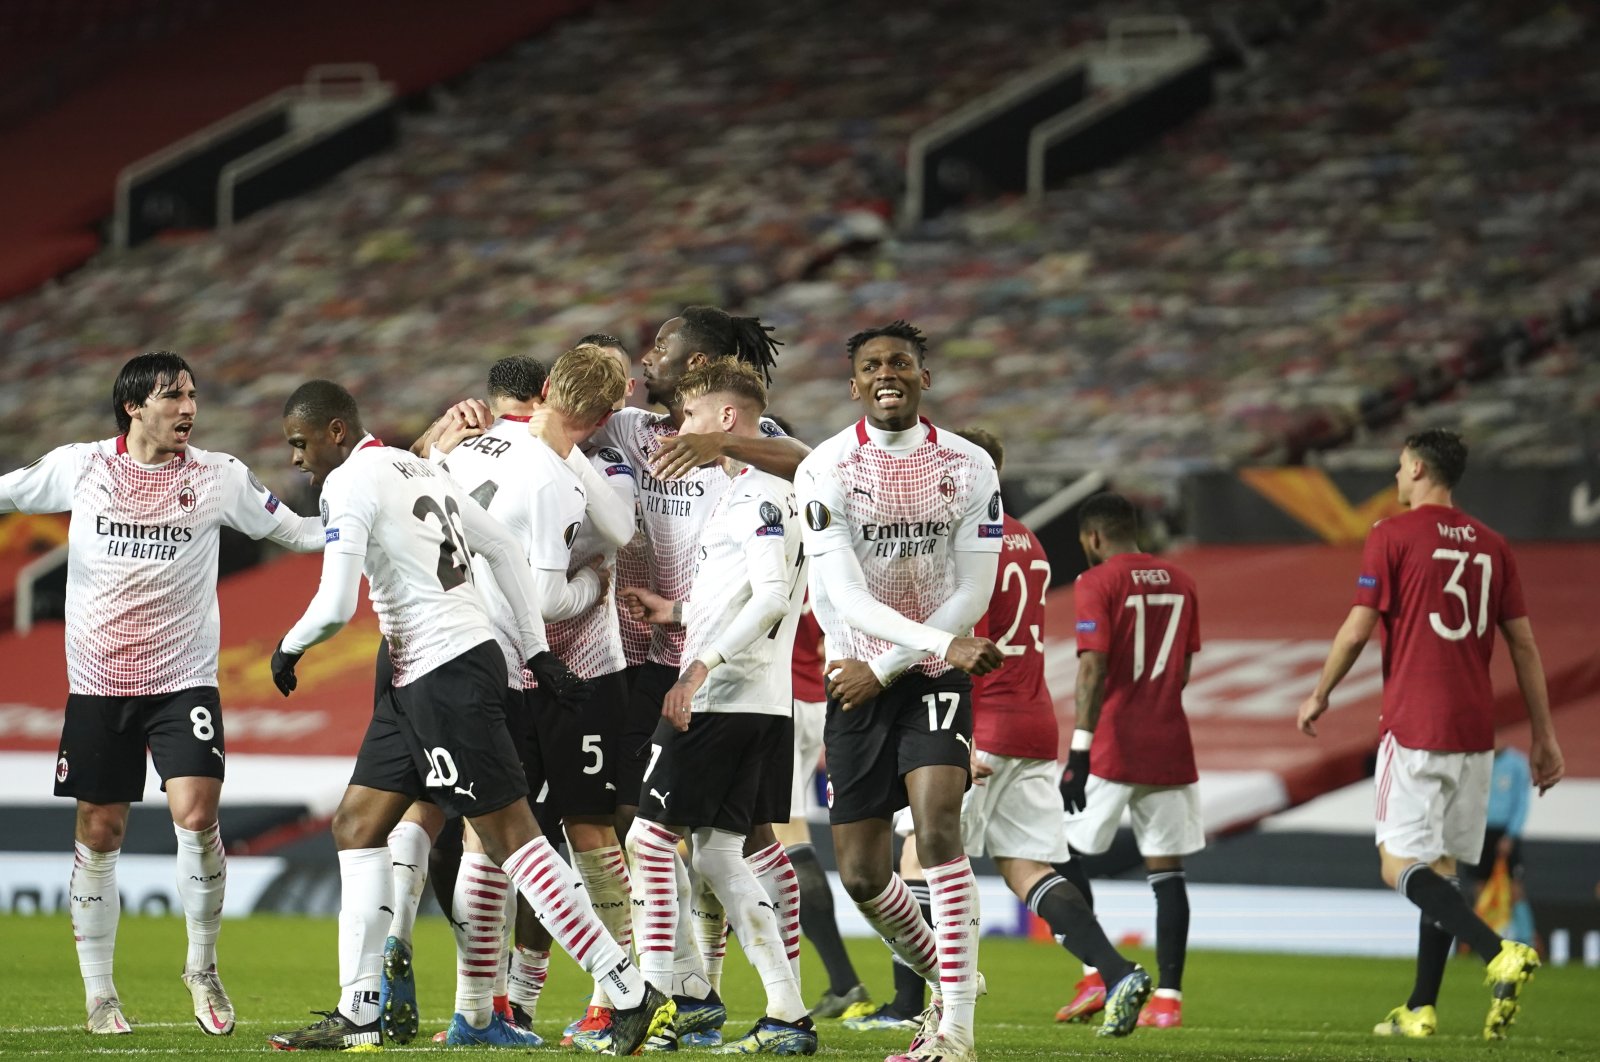 AC Milan players celebrate after Simon Kjaer scored Milan side's opening goal during the Europa League round of 16 first leg football match between Manchester United and AC Milan at Old Trafford in Manchester, England, March 11, 2021. (AP Photo)